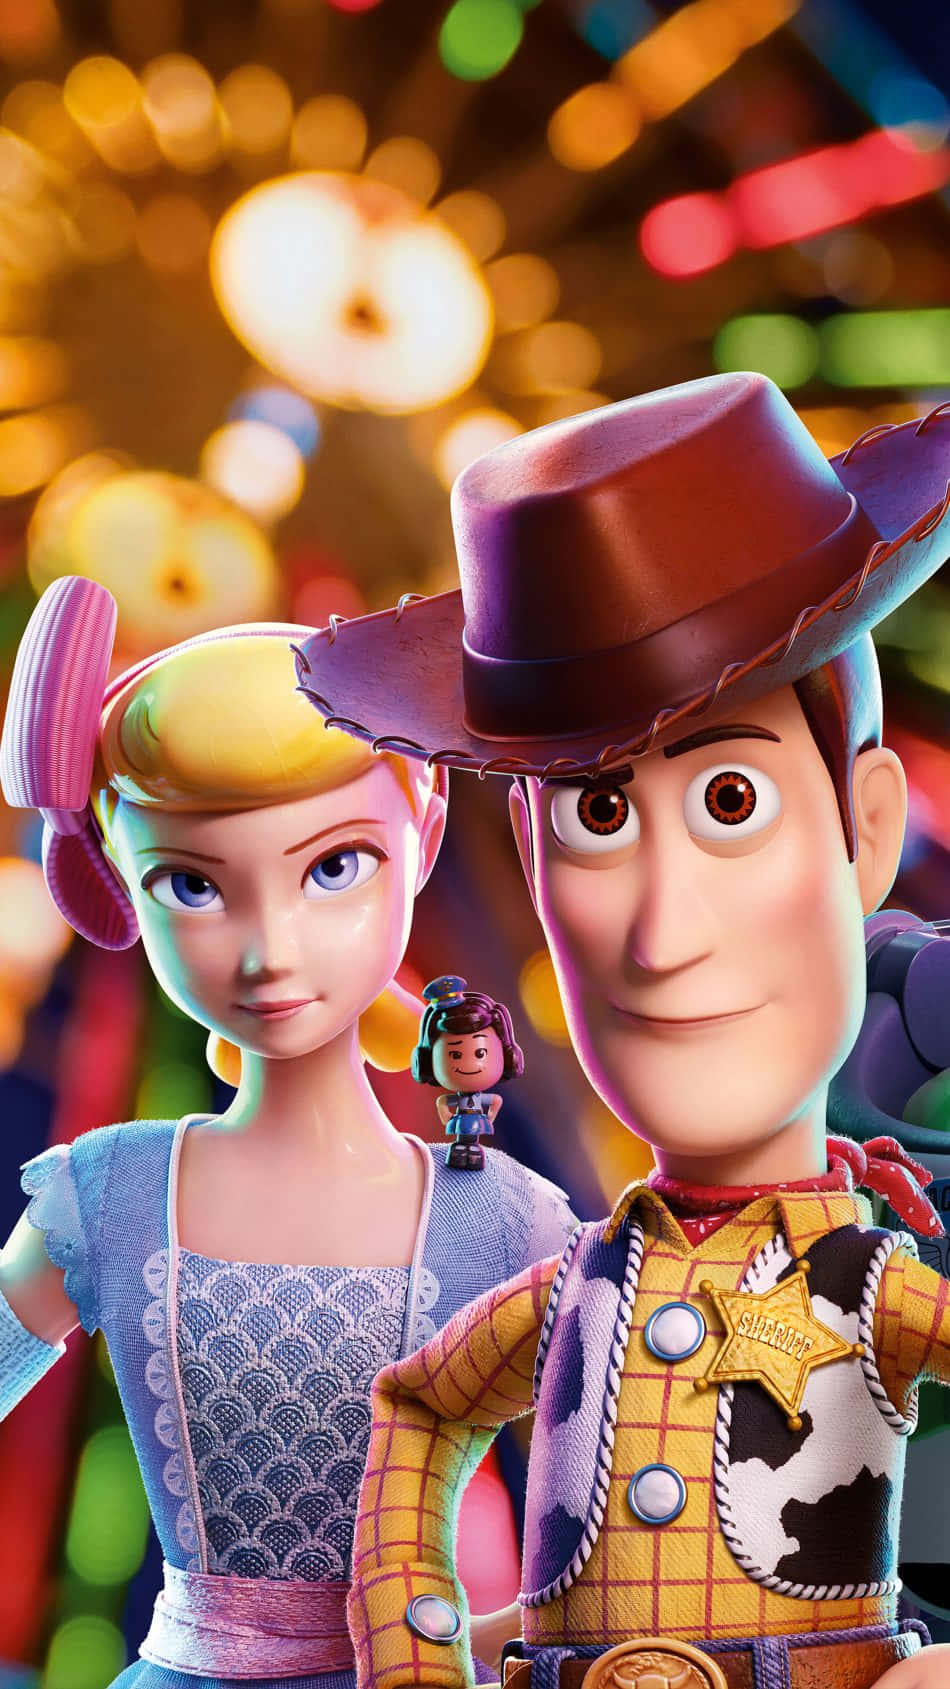 Woody embarks on a mission to find his long-lost friend in "Toy Story 4."